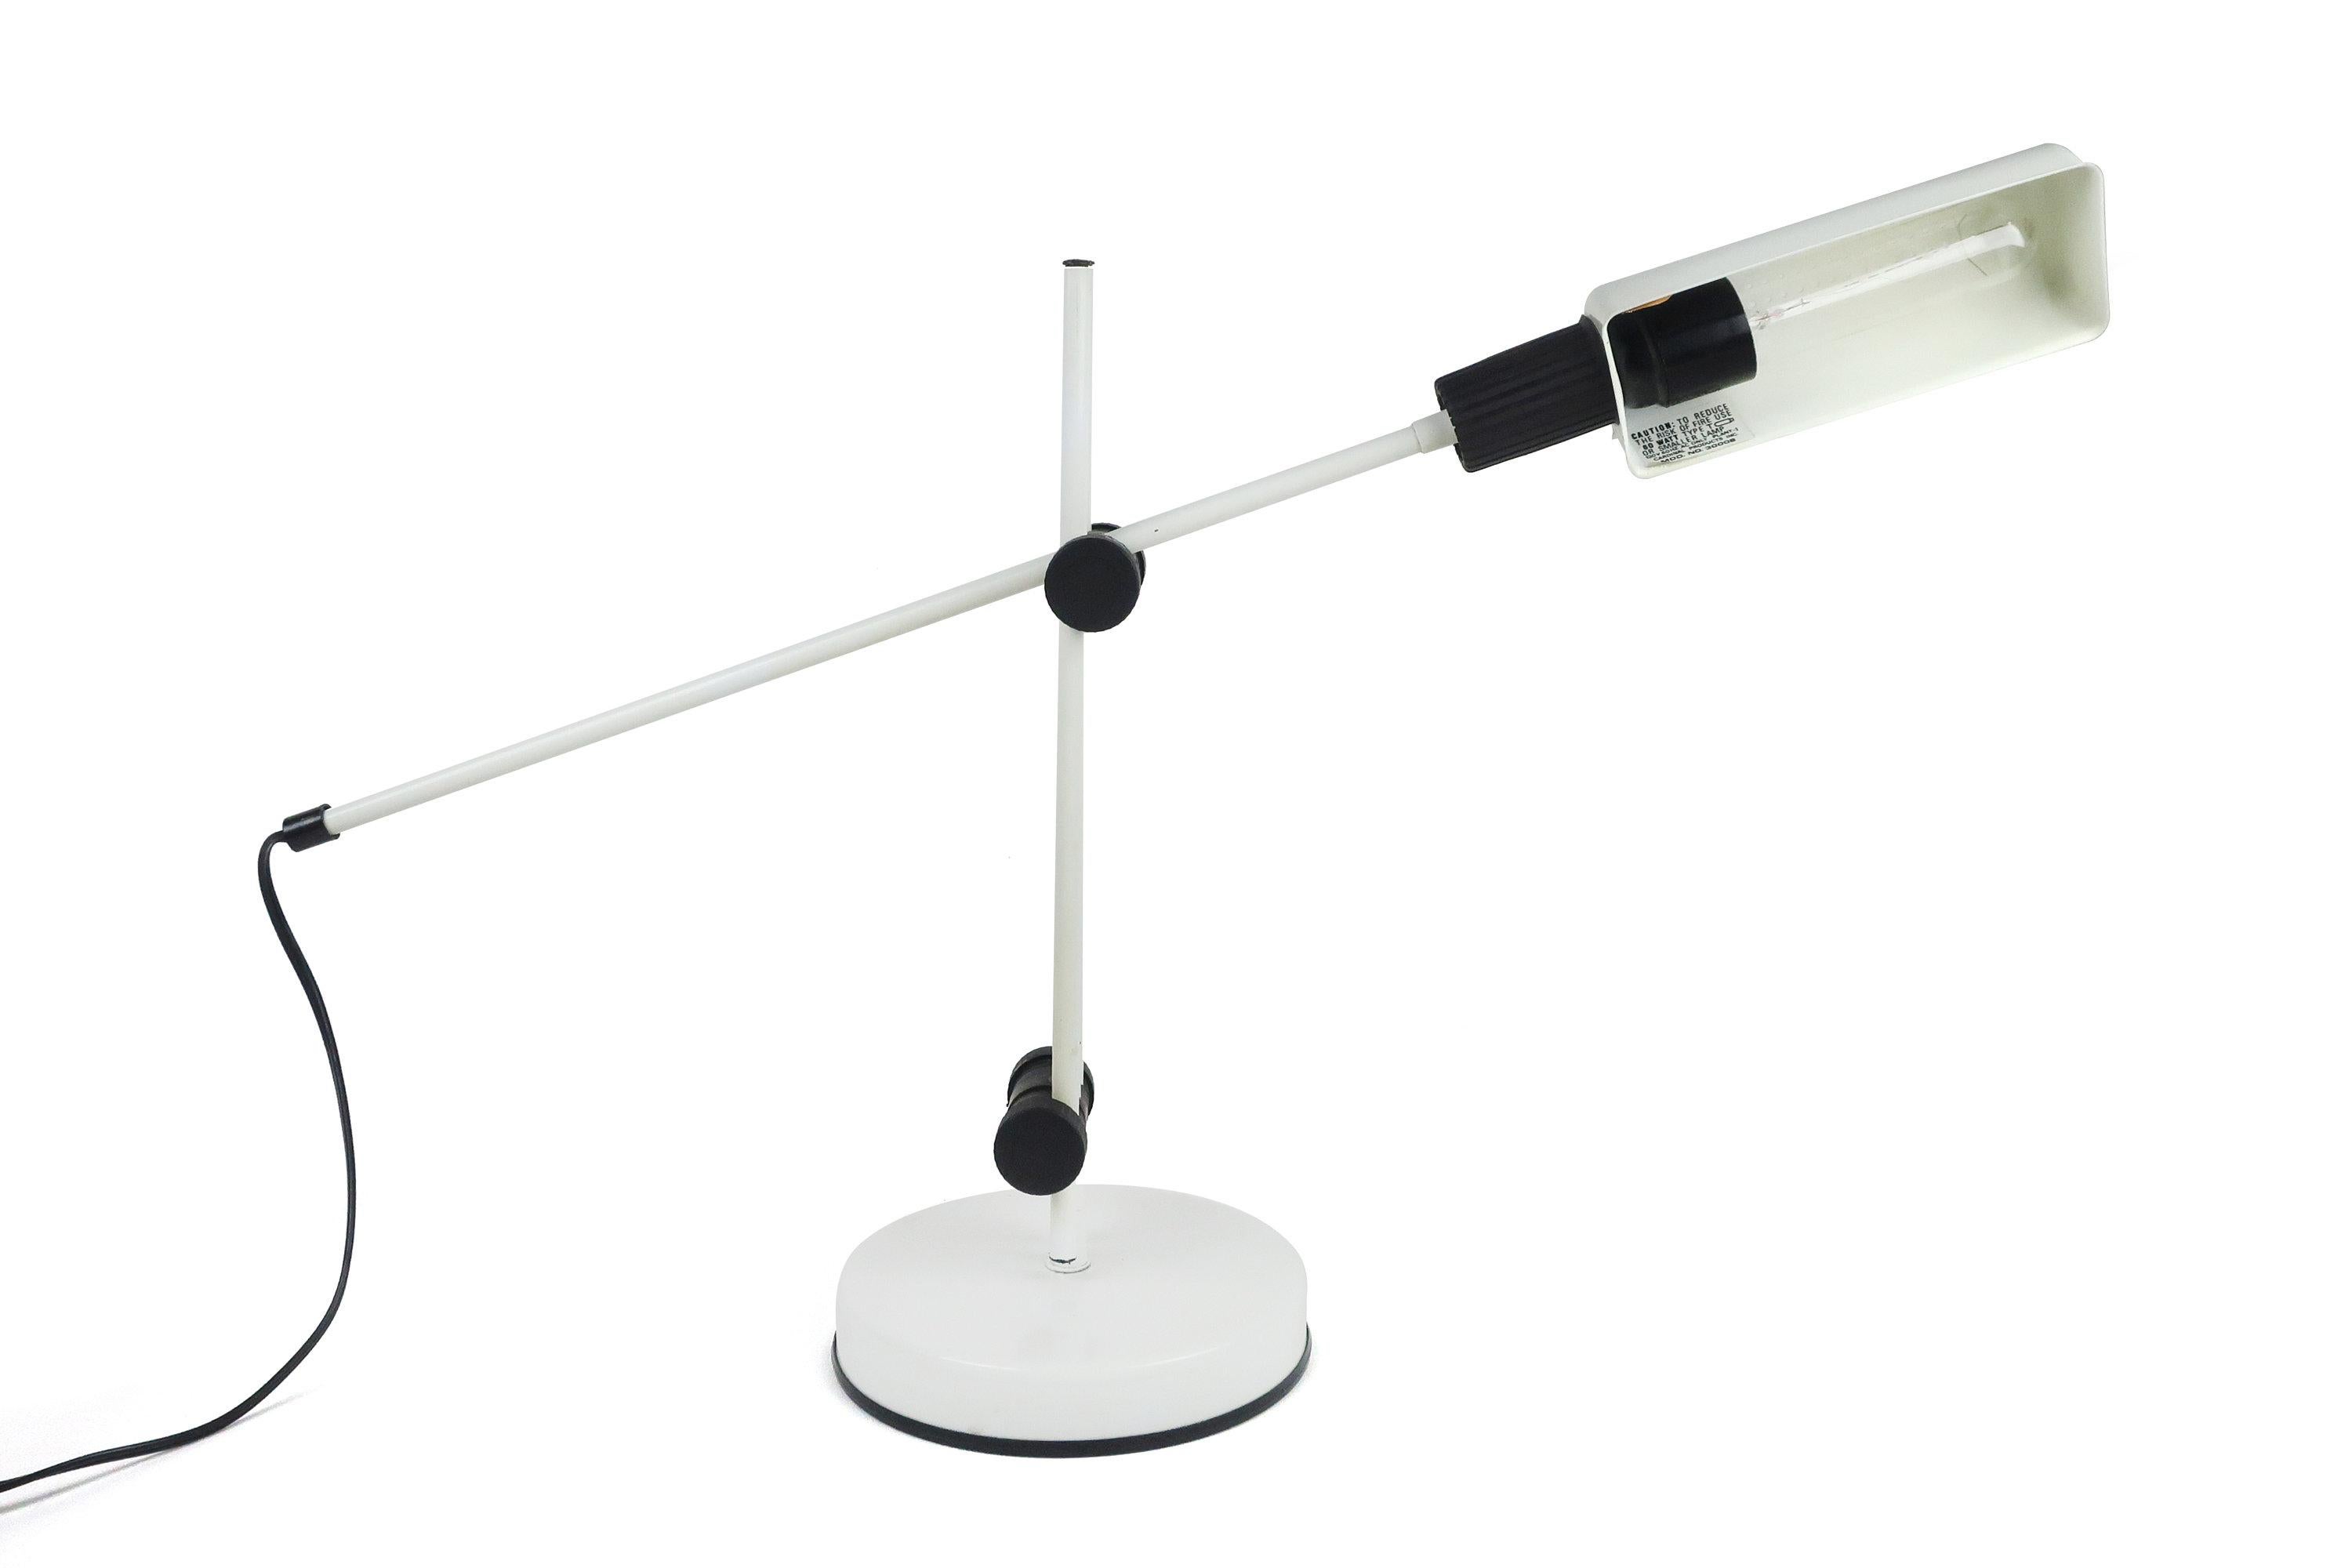 A minimalist 1980s Italian modern adjustable Veneta Lumi table lamp that pivots in two places and features a rotating shade. White shade, stem, and heavy base, the lamp has black contrasting accents.
 
 In great vintage condition and works